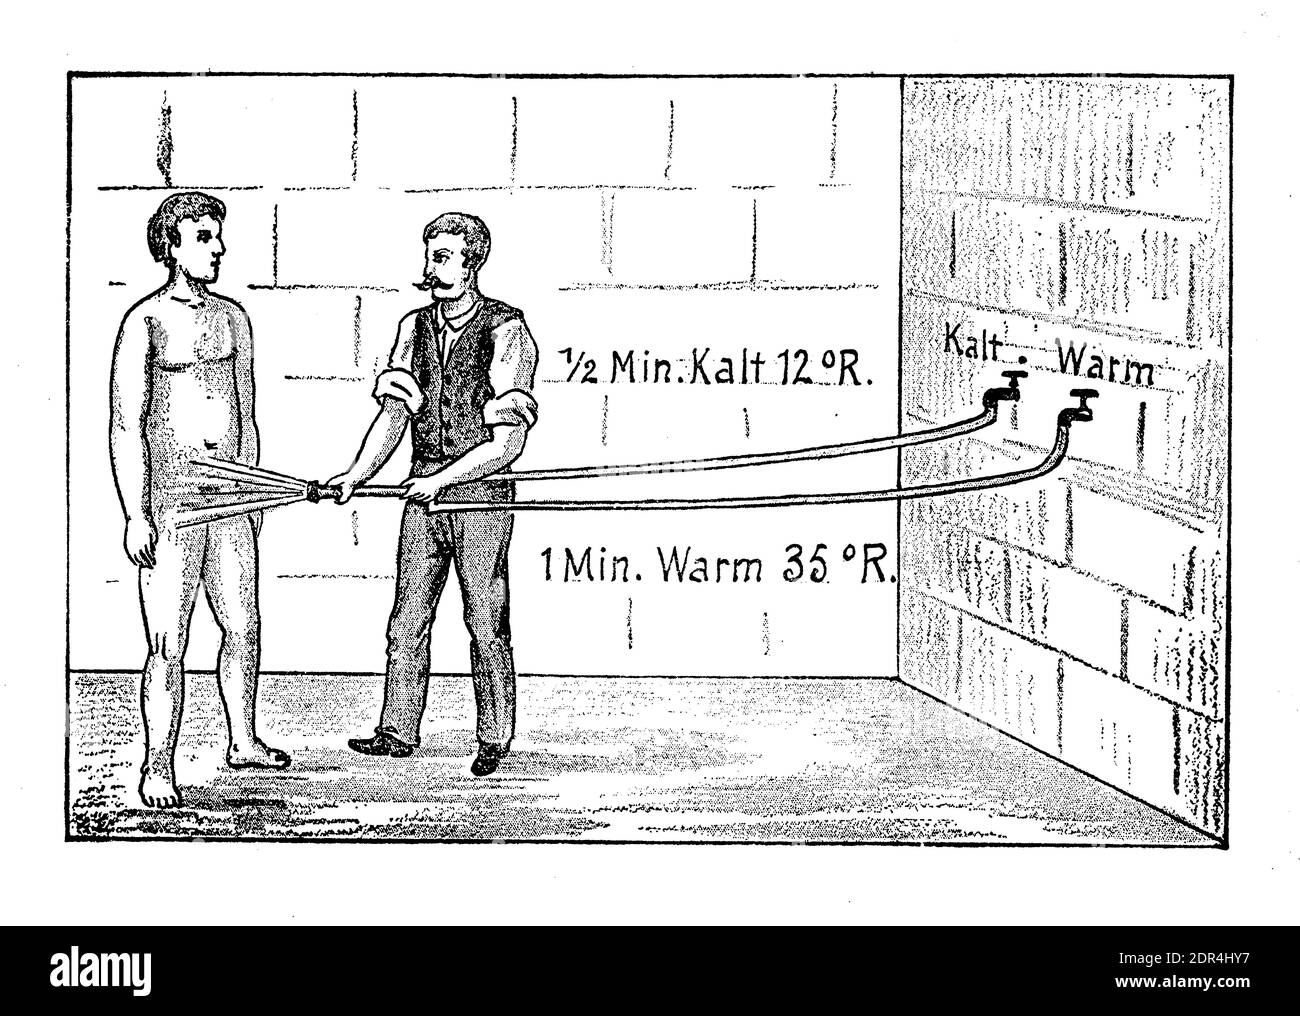 Contrast shower therapy: man taking a shower froma nurse, alternating hot and cold water several times, 19th century illustration Stock Photo